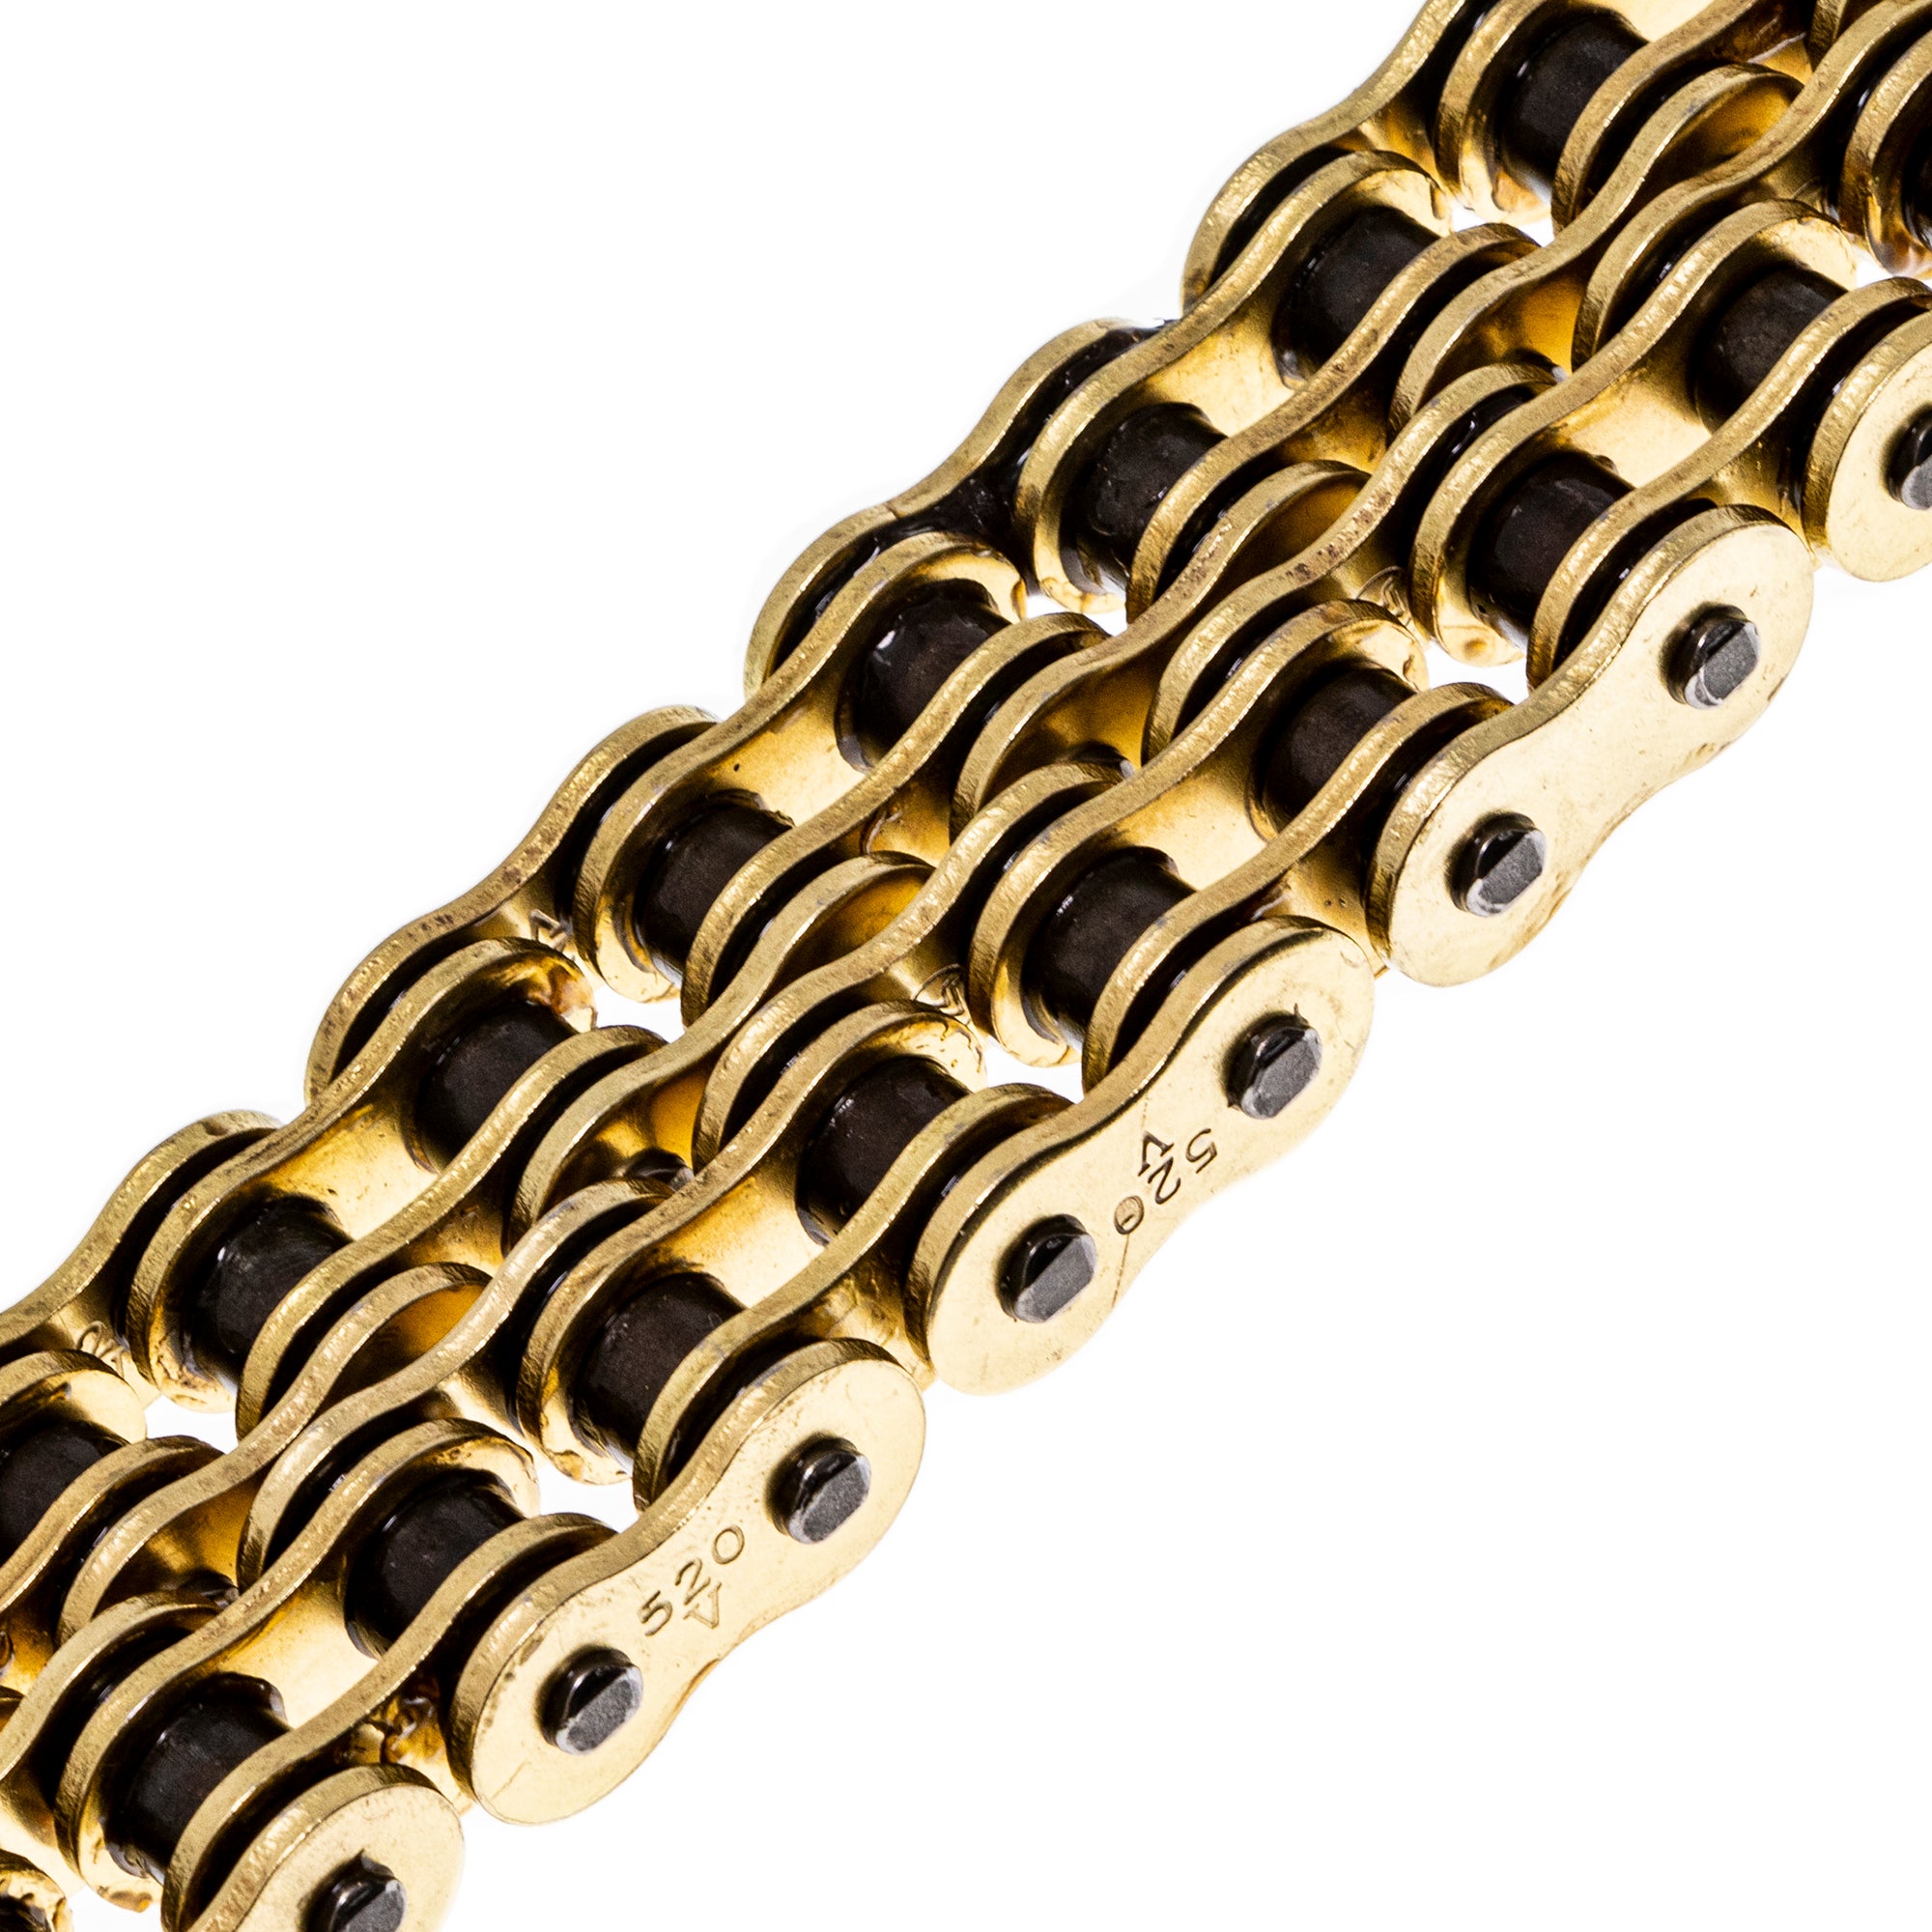 Gold X-Ring Chain 122 w/ Master Link for zOTHER 5492 NICHE 519-CDC2503H